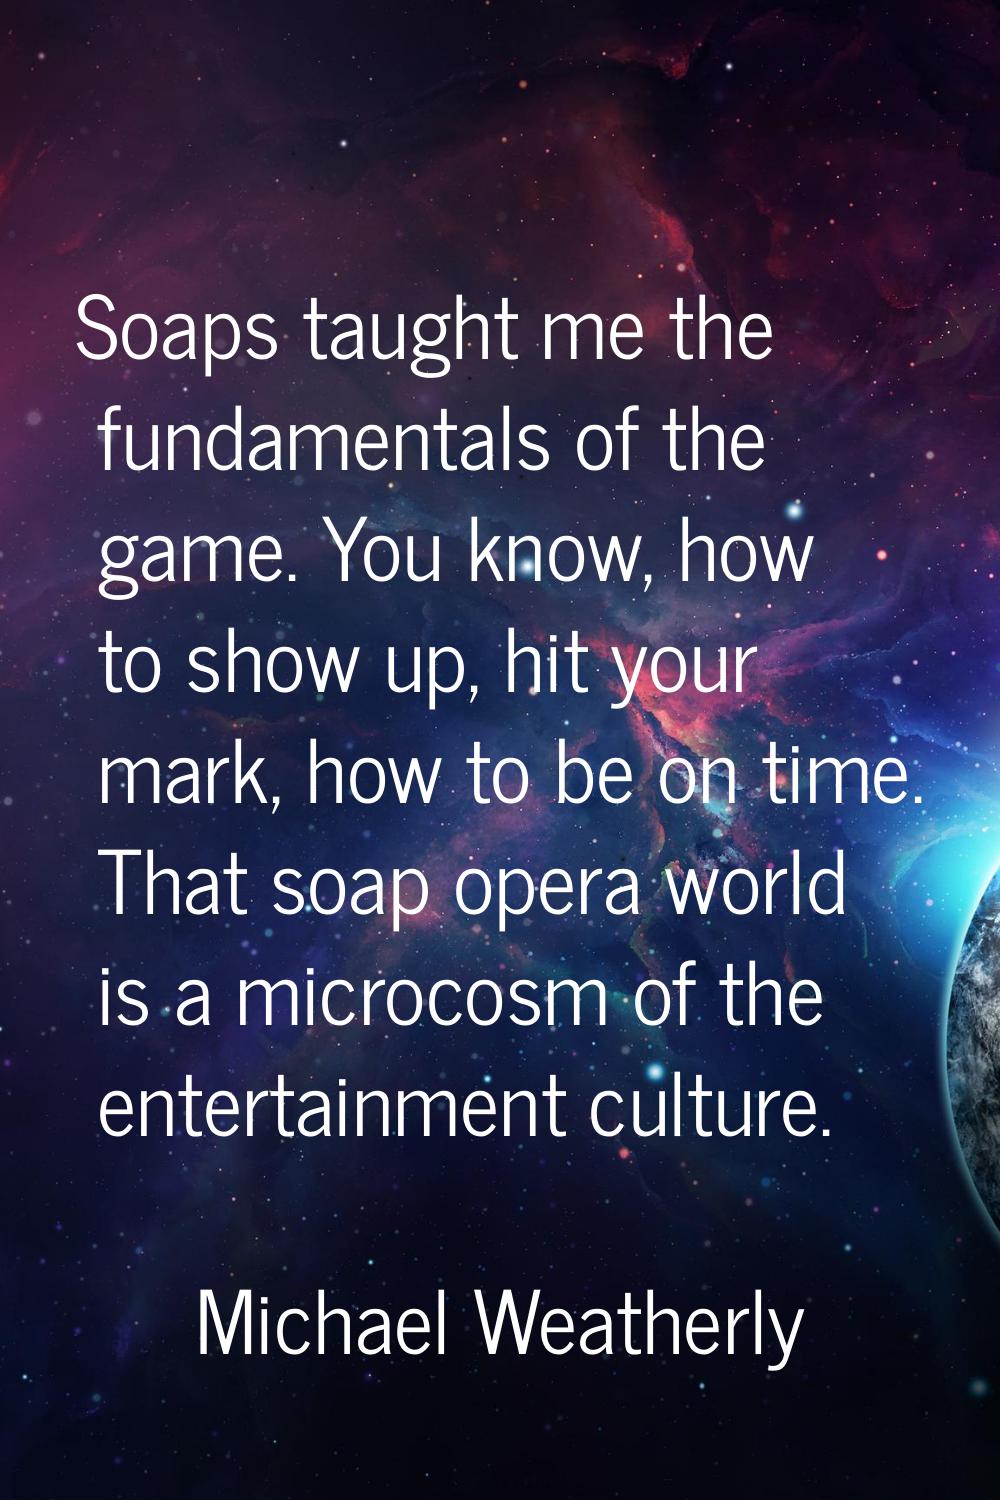 Soaps taught me the fundamentals of the game. You know, how to show up, hit your mark, how to be on